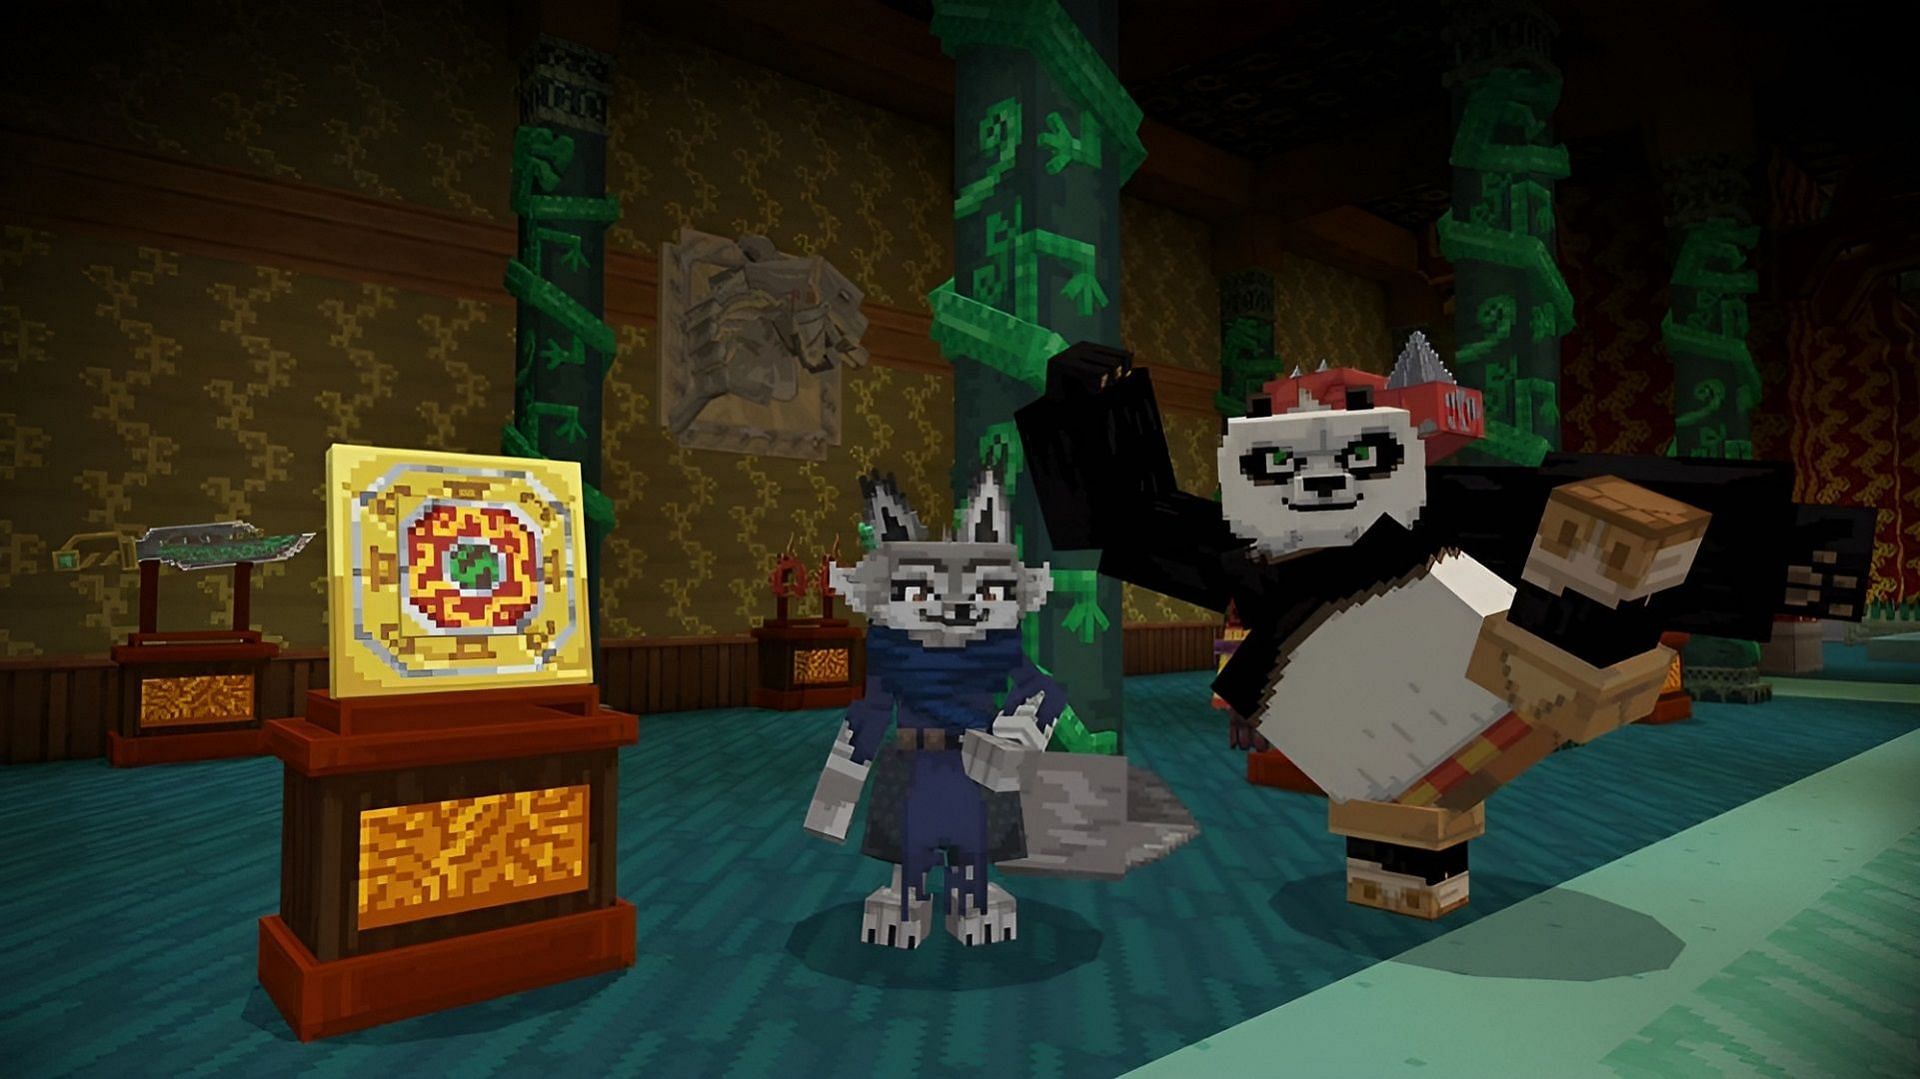 Minecraft x Kung Fu Panda DLC announced: All you need to know